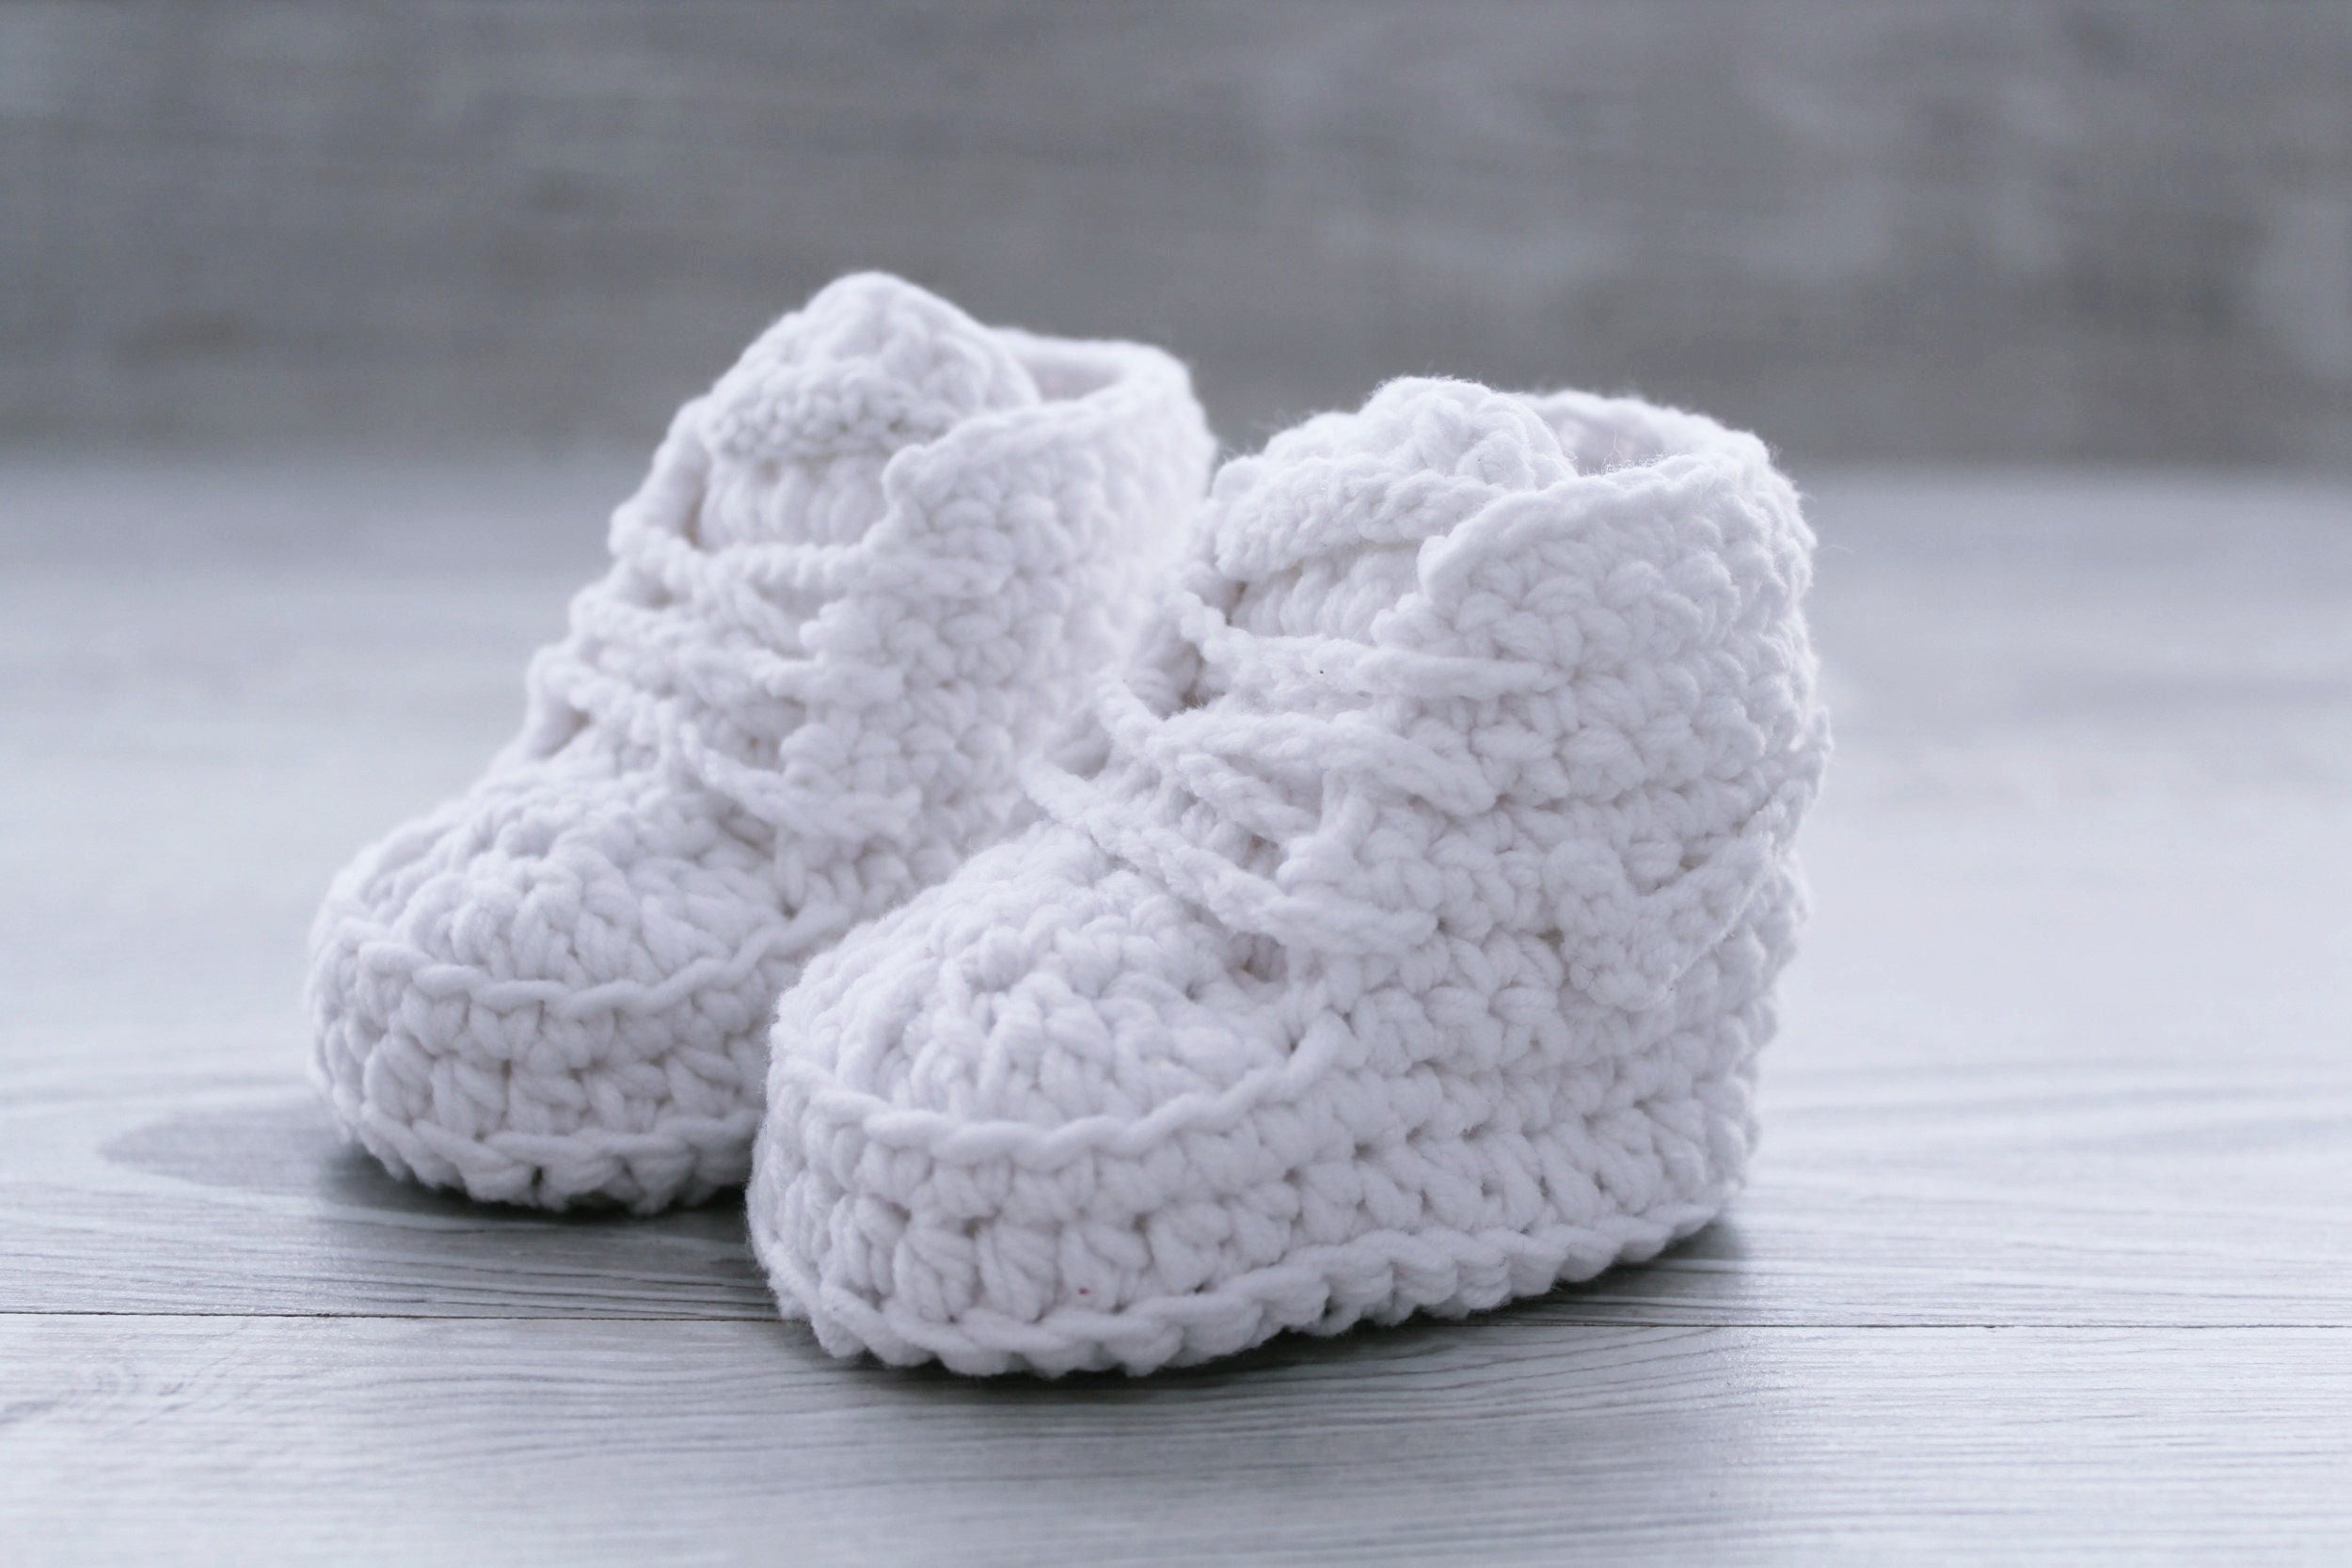 0 to 3 months baby shoes